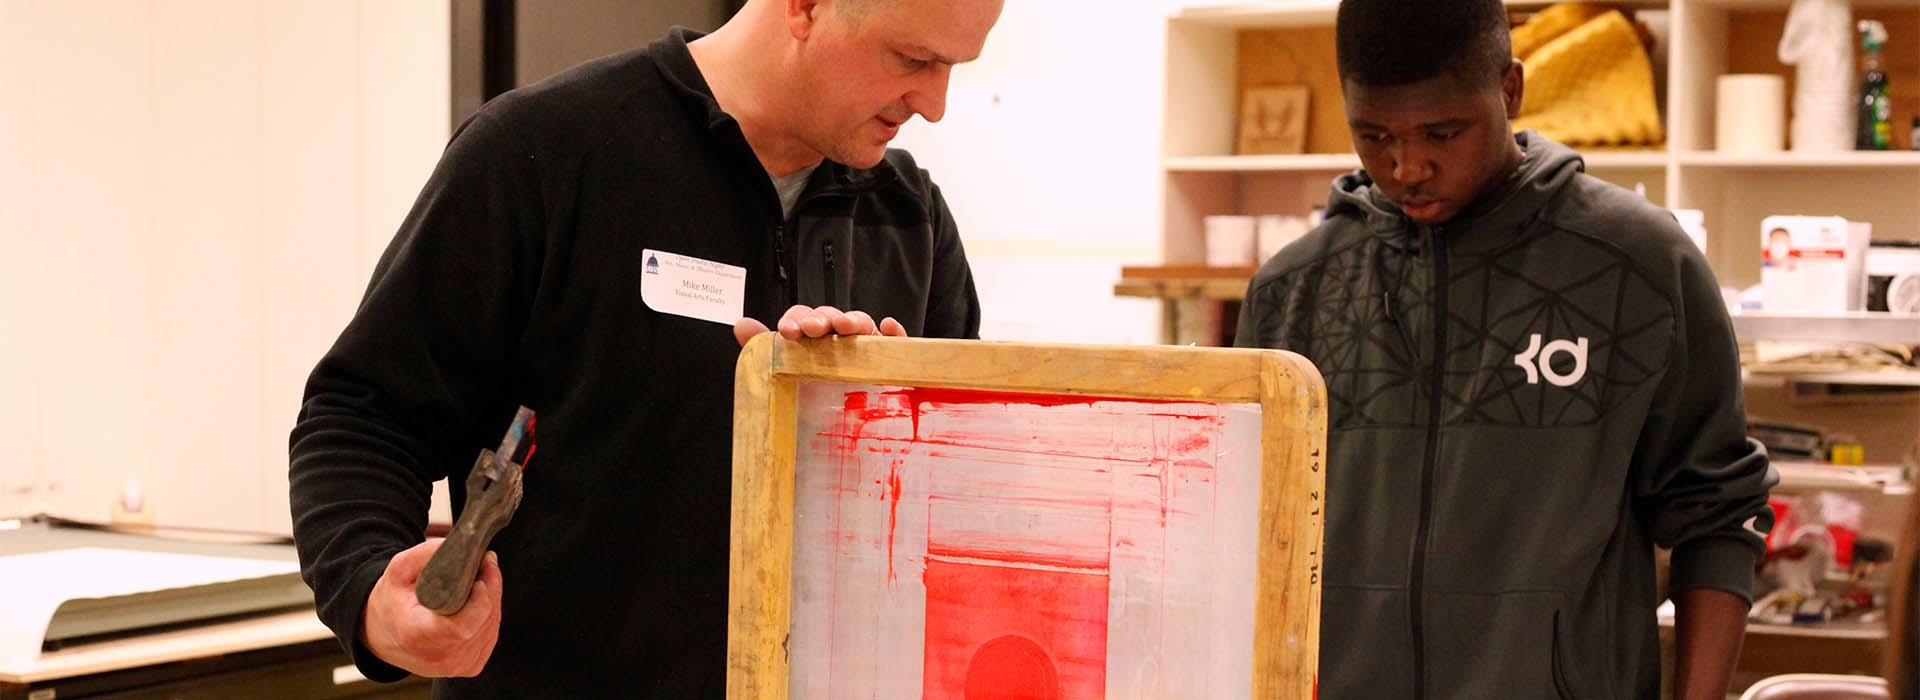 Two men standing over a screen-printing screen.